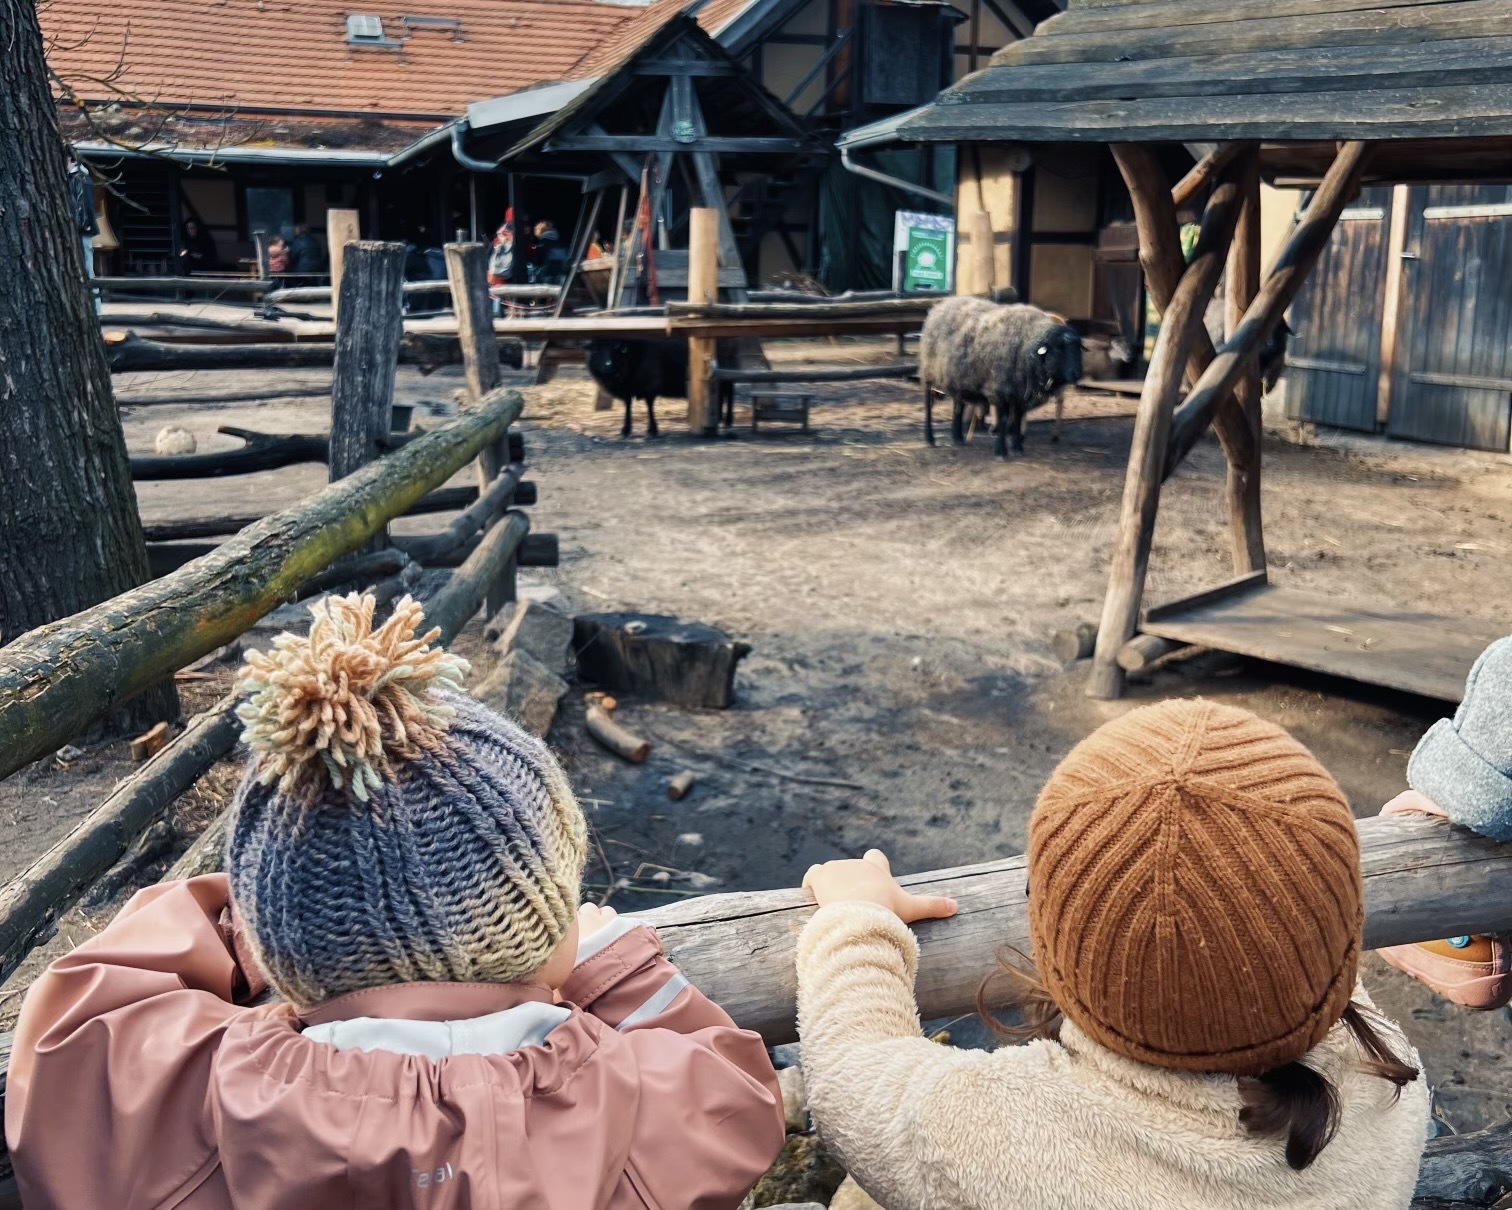 Exploring Kinderbauernhof Pinke-Panke: A Fun-Filled Day for Families and Children